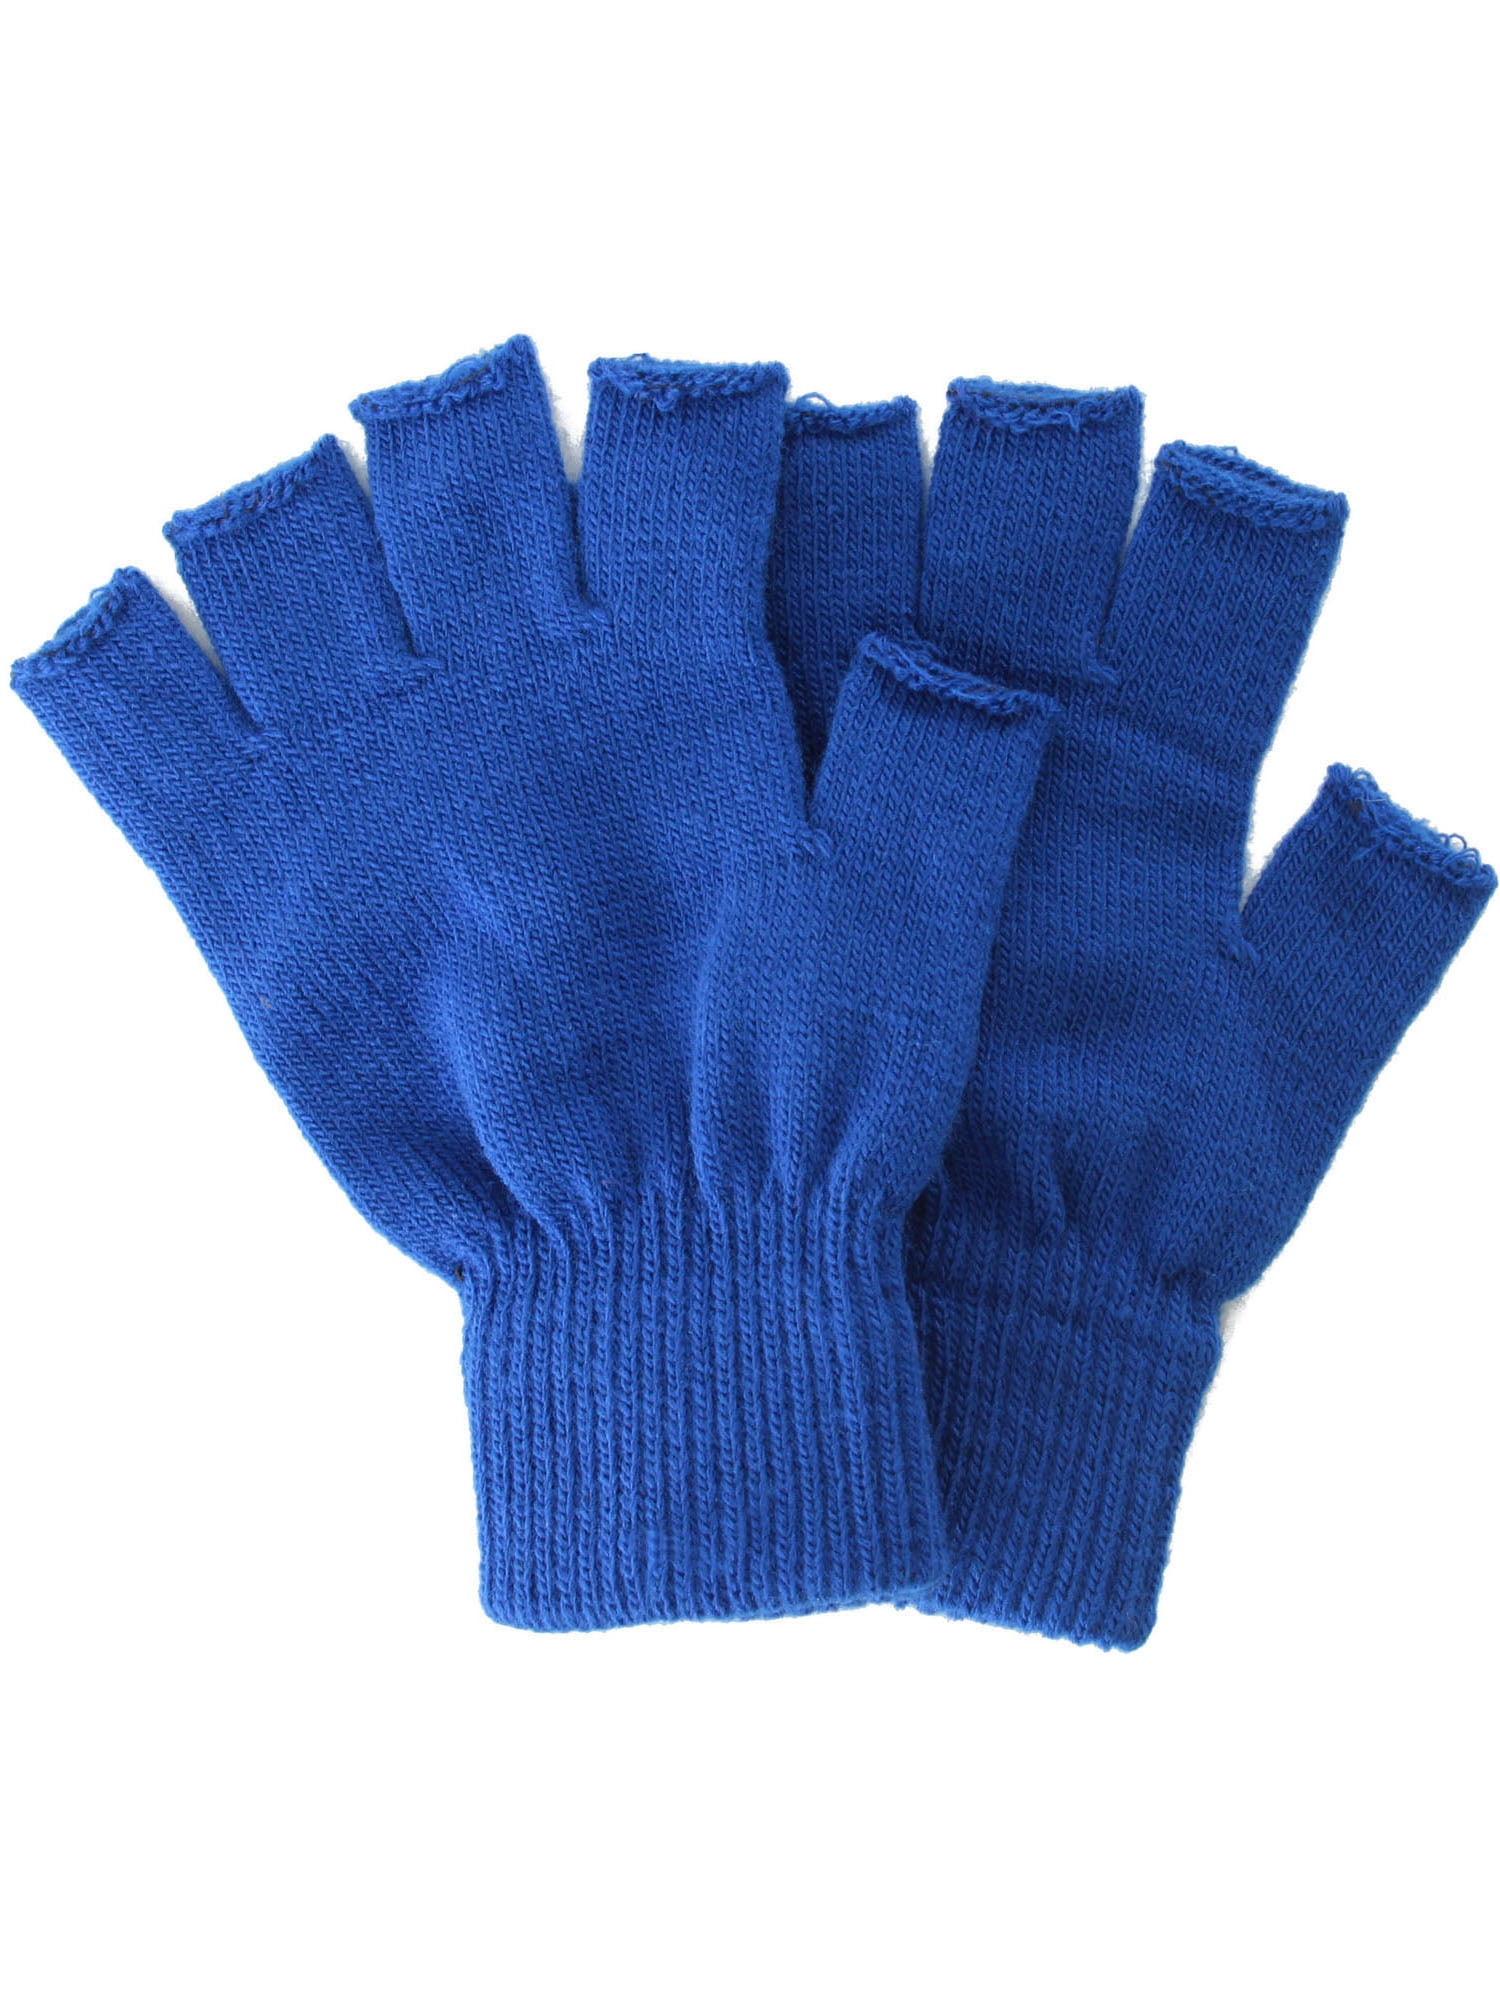 7-14 Years Old 5 Pairs Unisex Kid Gloves Convertible Winter Thick Warm Mittens for Boys Girls 